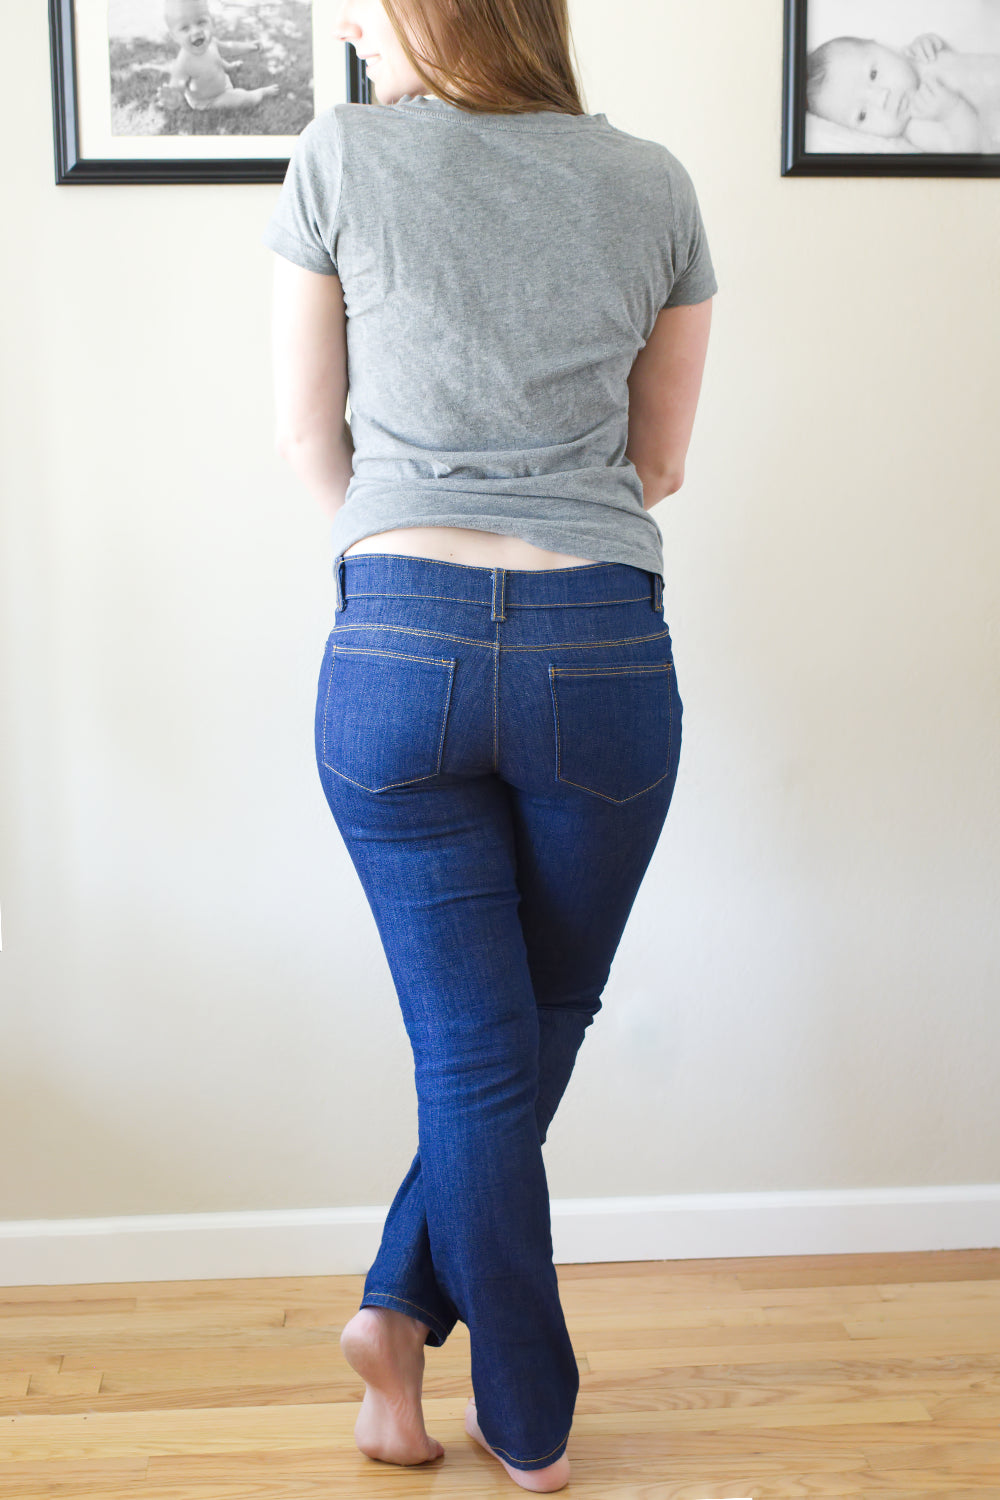 Photo of woman facing away from the camera wearing the DIBY Club Bravado Bootleg Jeans